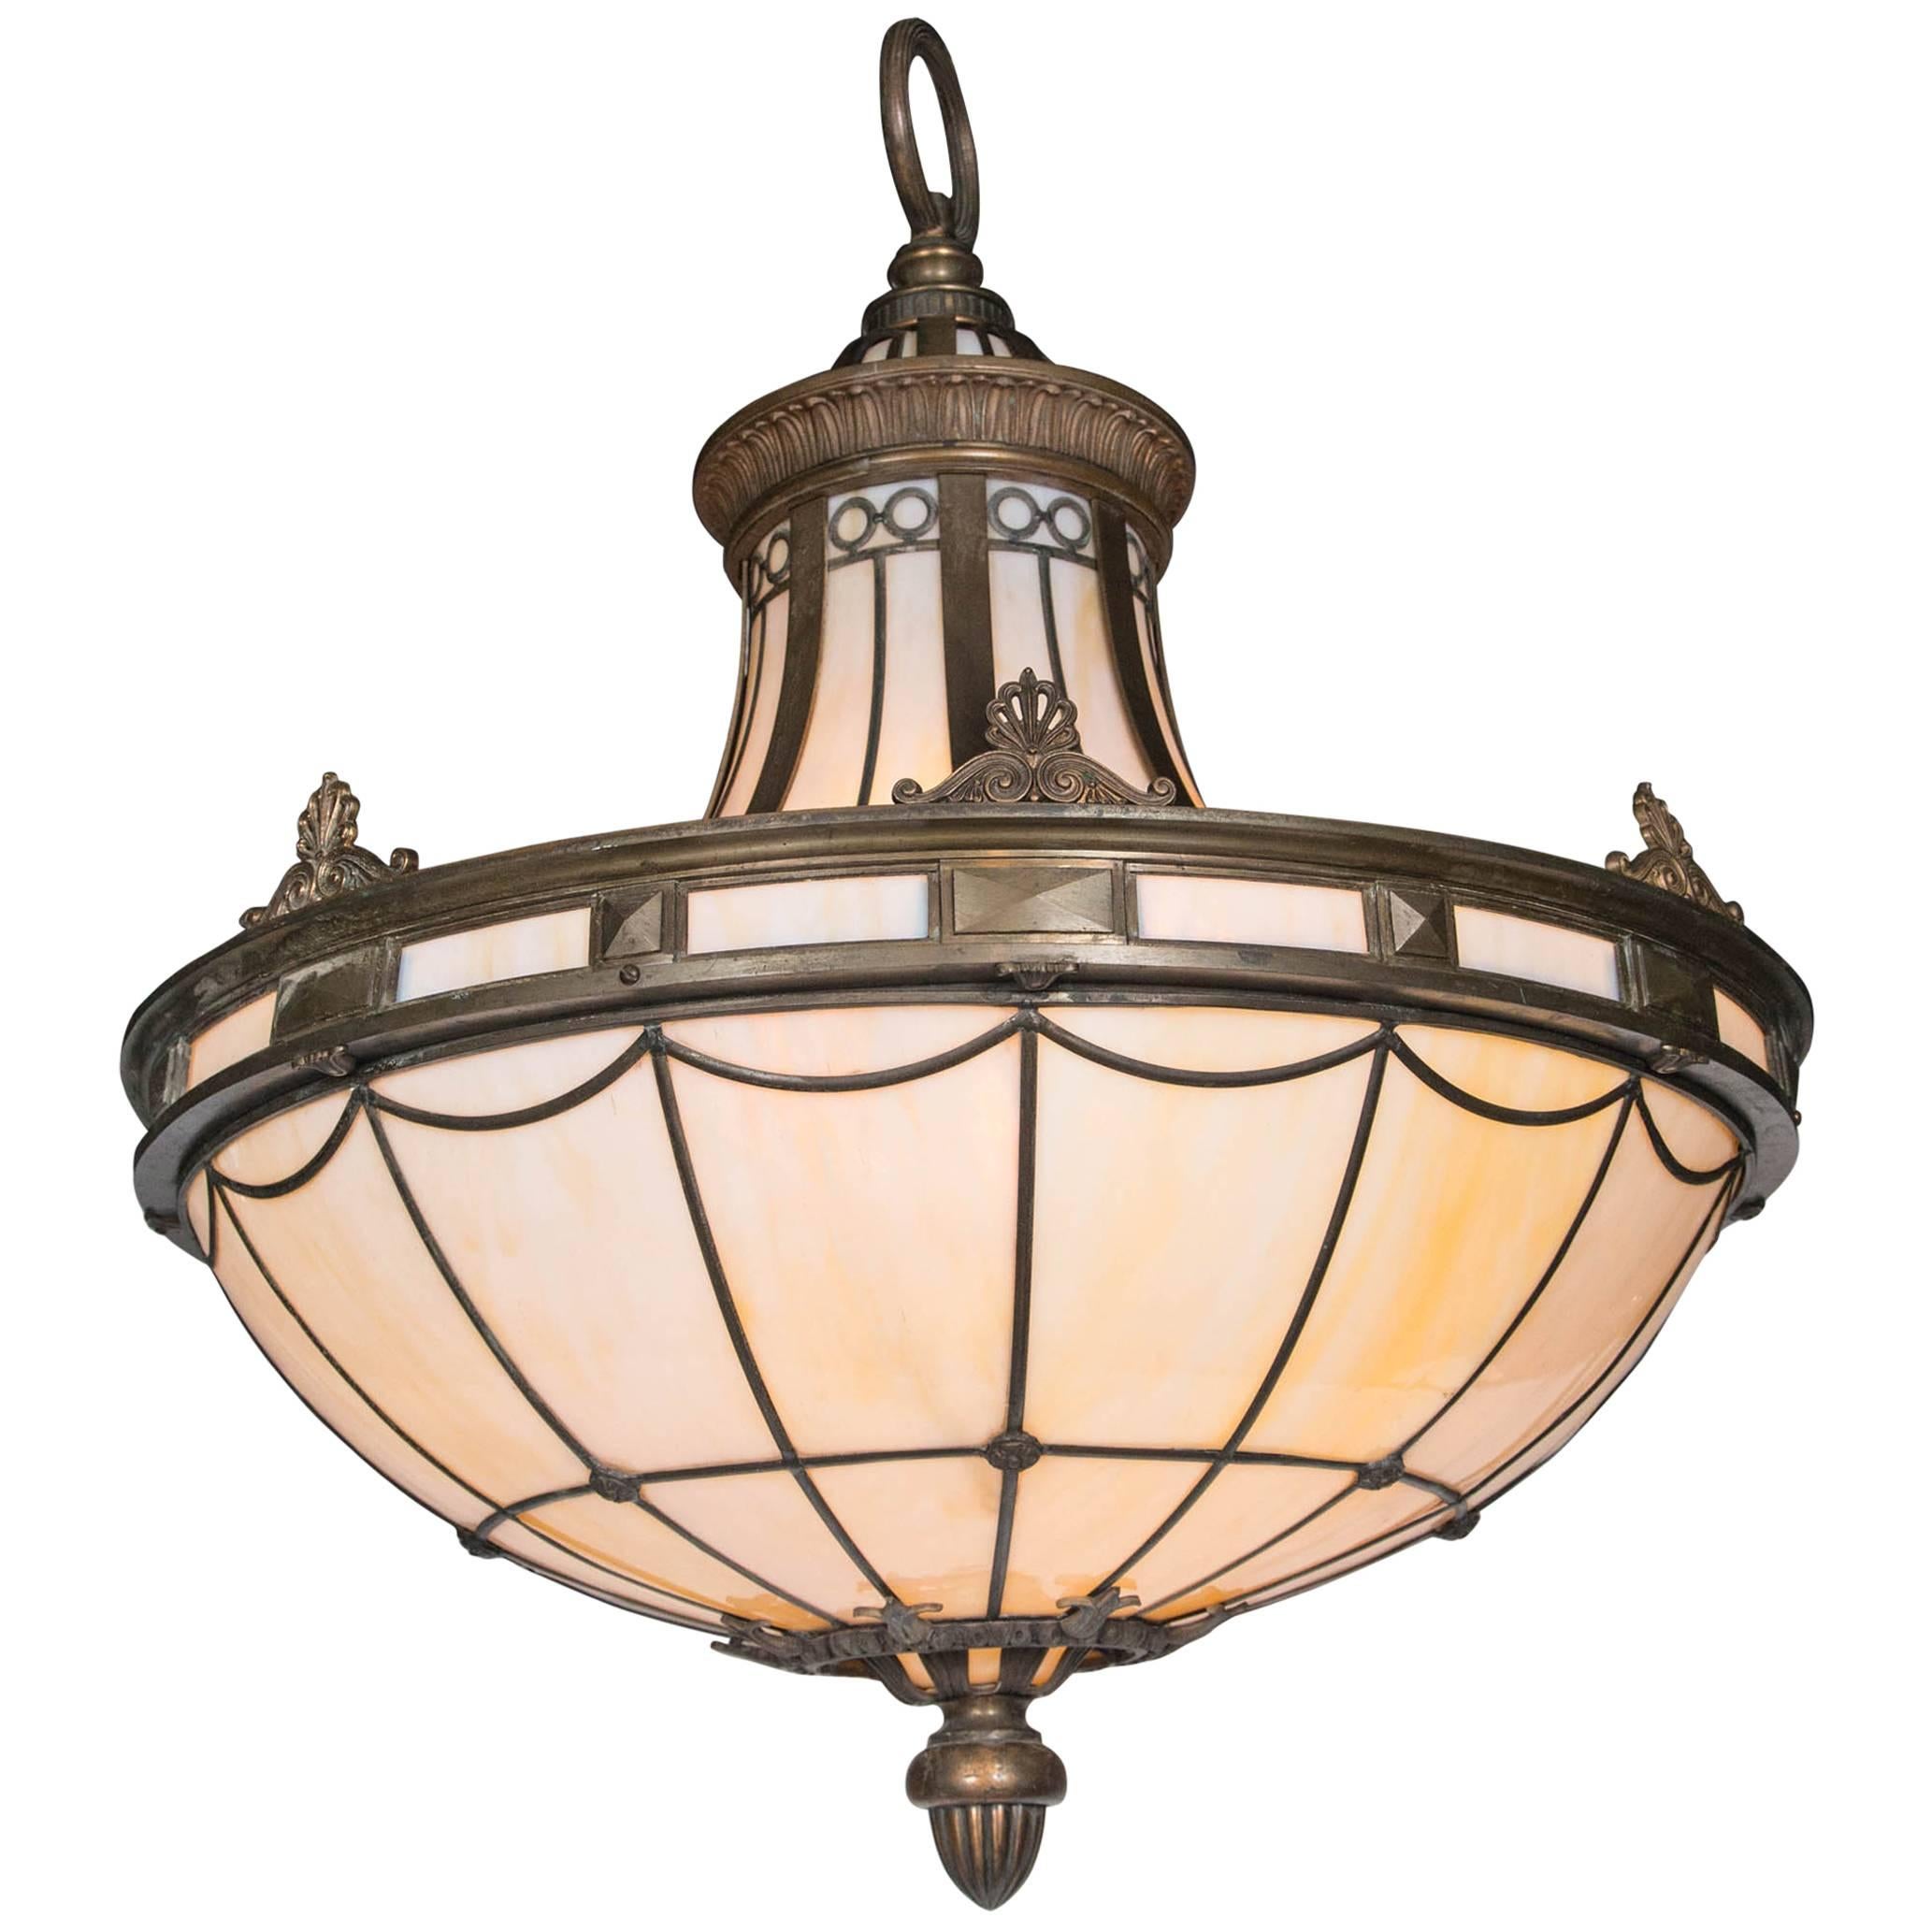 Caldwell Neoclassic Style Light Fixture with Interior Lights For Sale